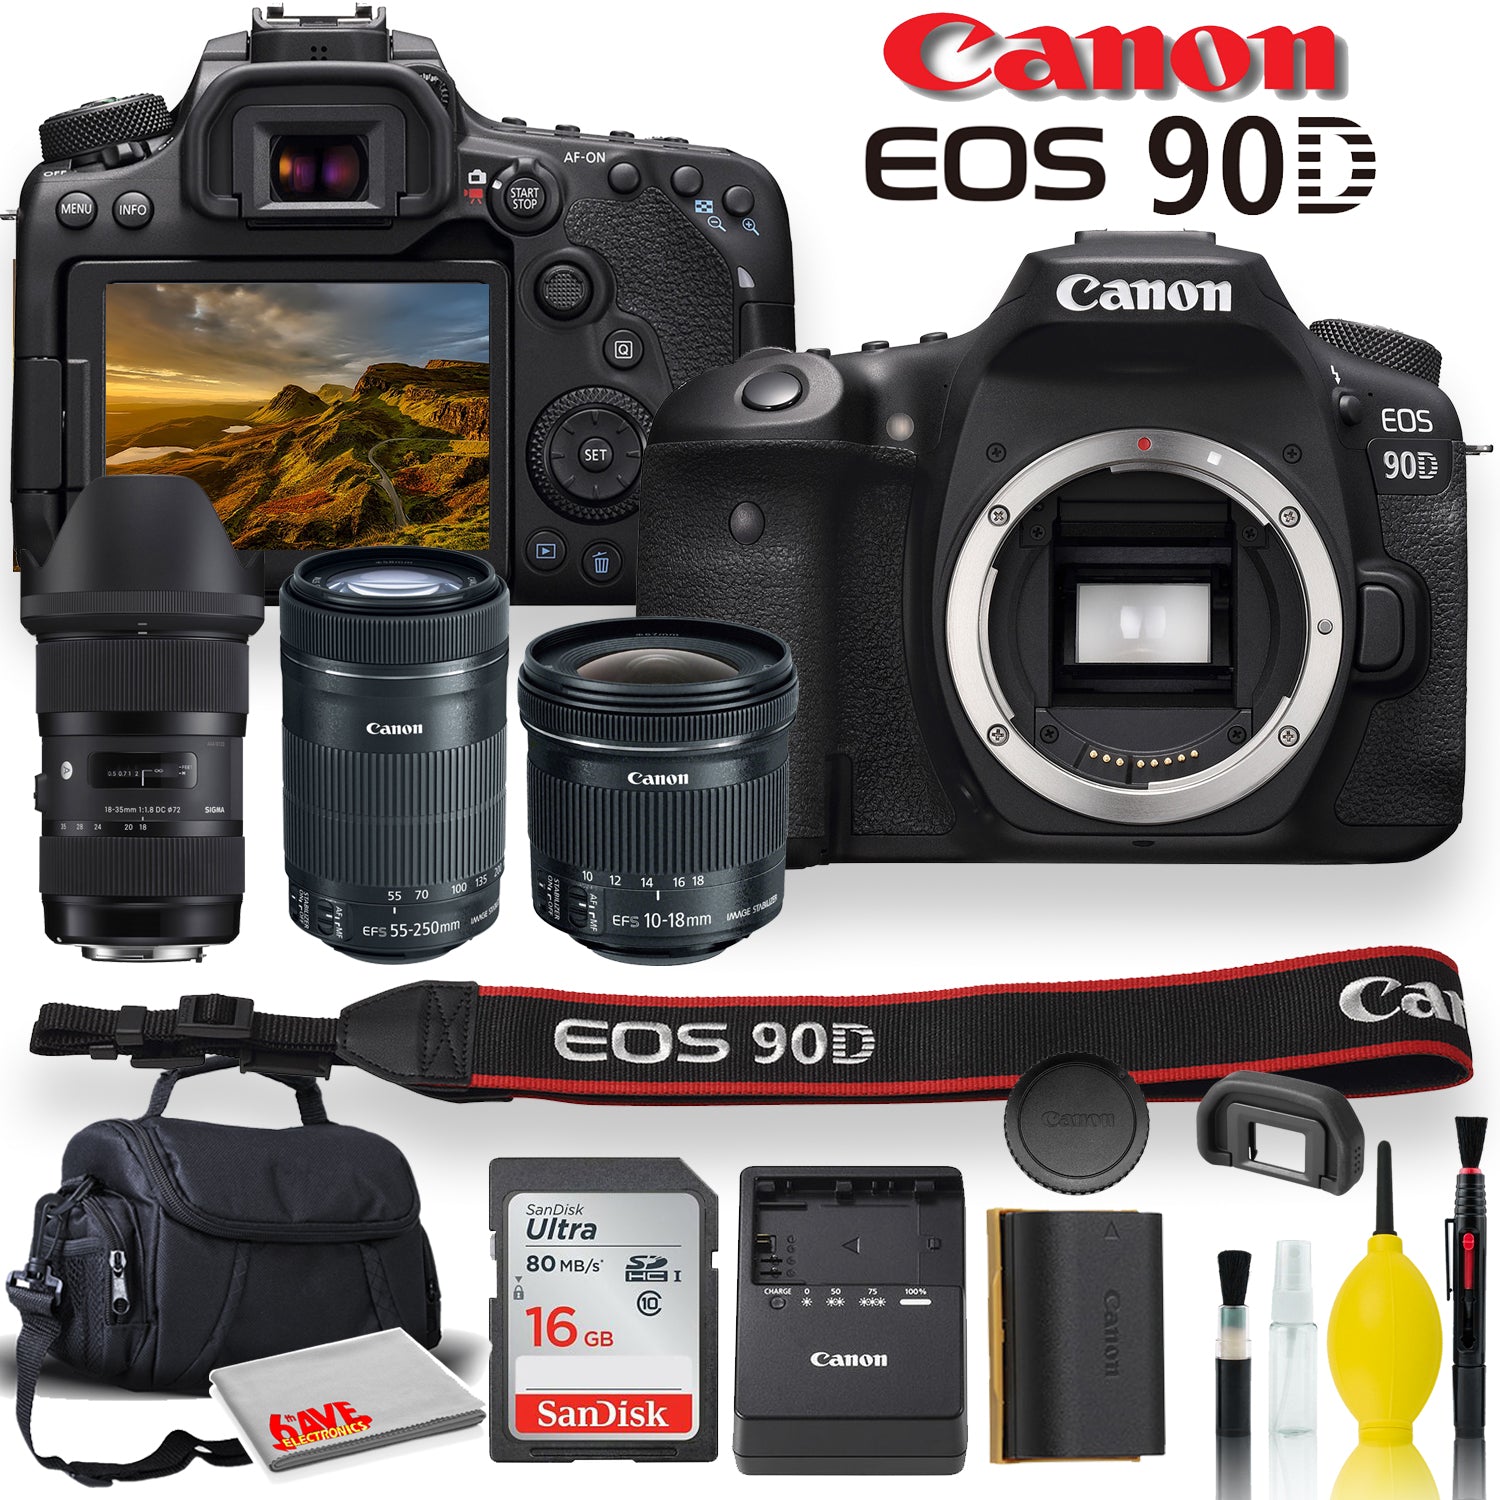 Canon EOS 90D DSLR Camera With Sigma 18-35mm, Canon EF-S 55-250mm, Canon EF-S 10-18mm, Soft Padded Case, Memory Card, and More - Triple Lens Set